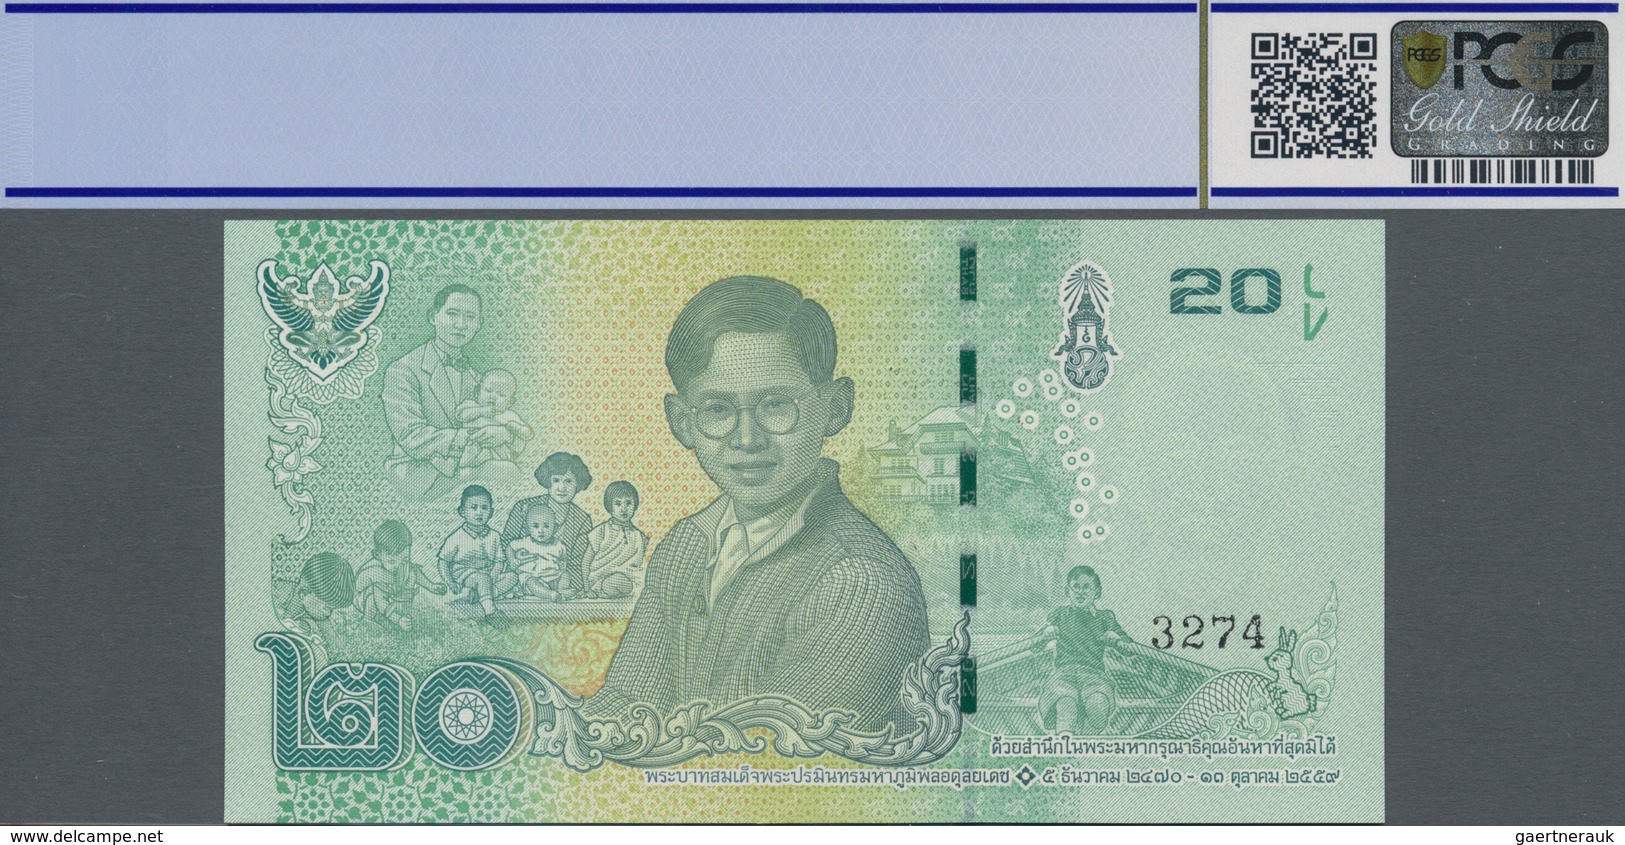 Thailand: Original folder of the Bank of Thailand with 5 Specimen 20 - 1000 Baht 2017 commemorating